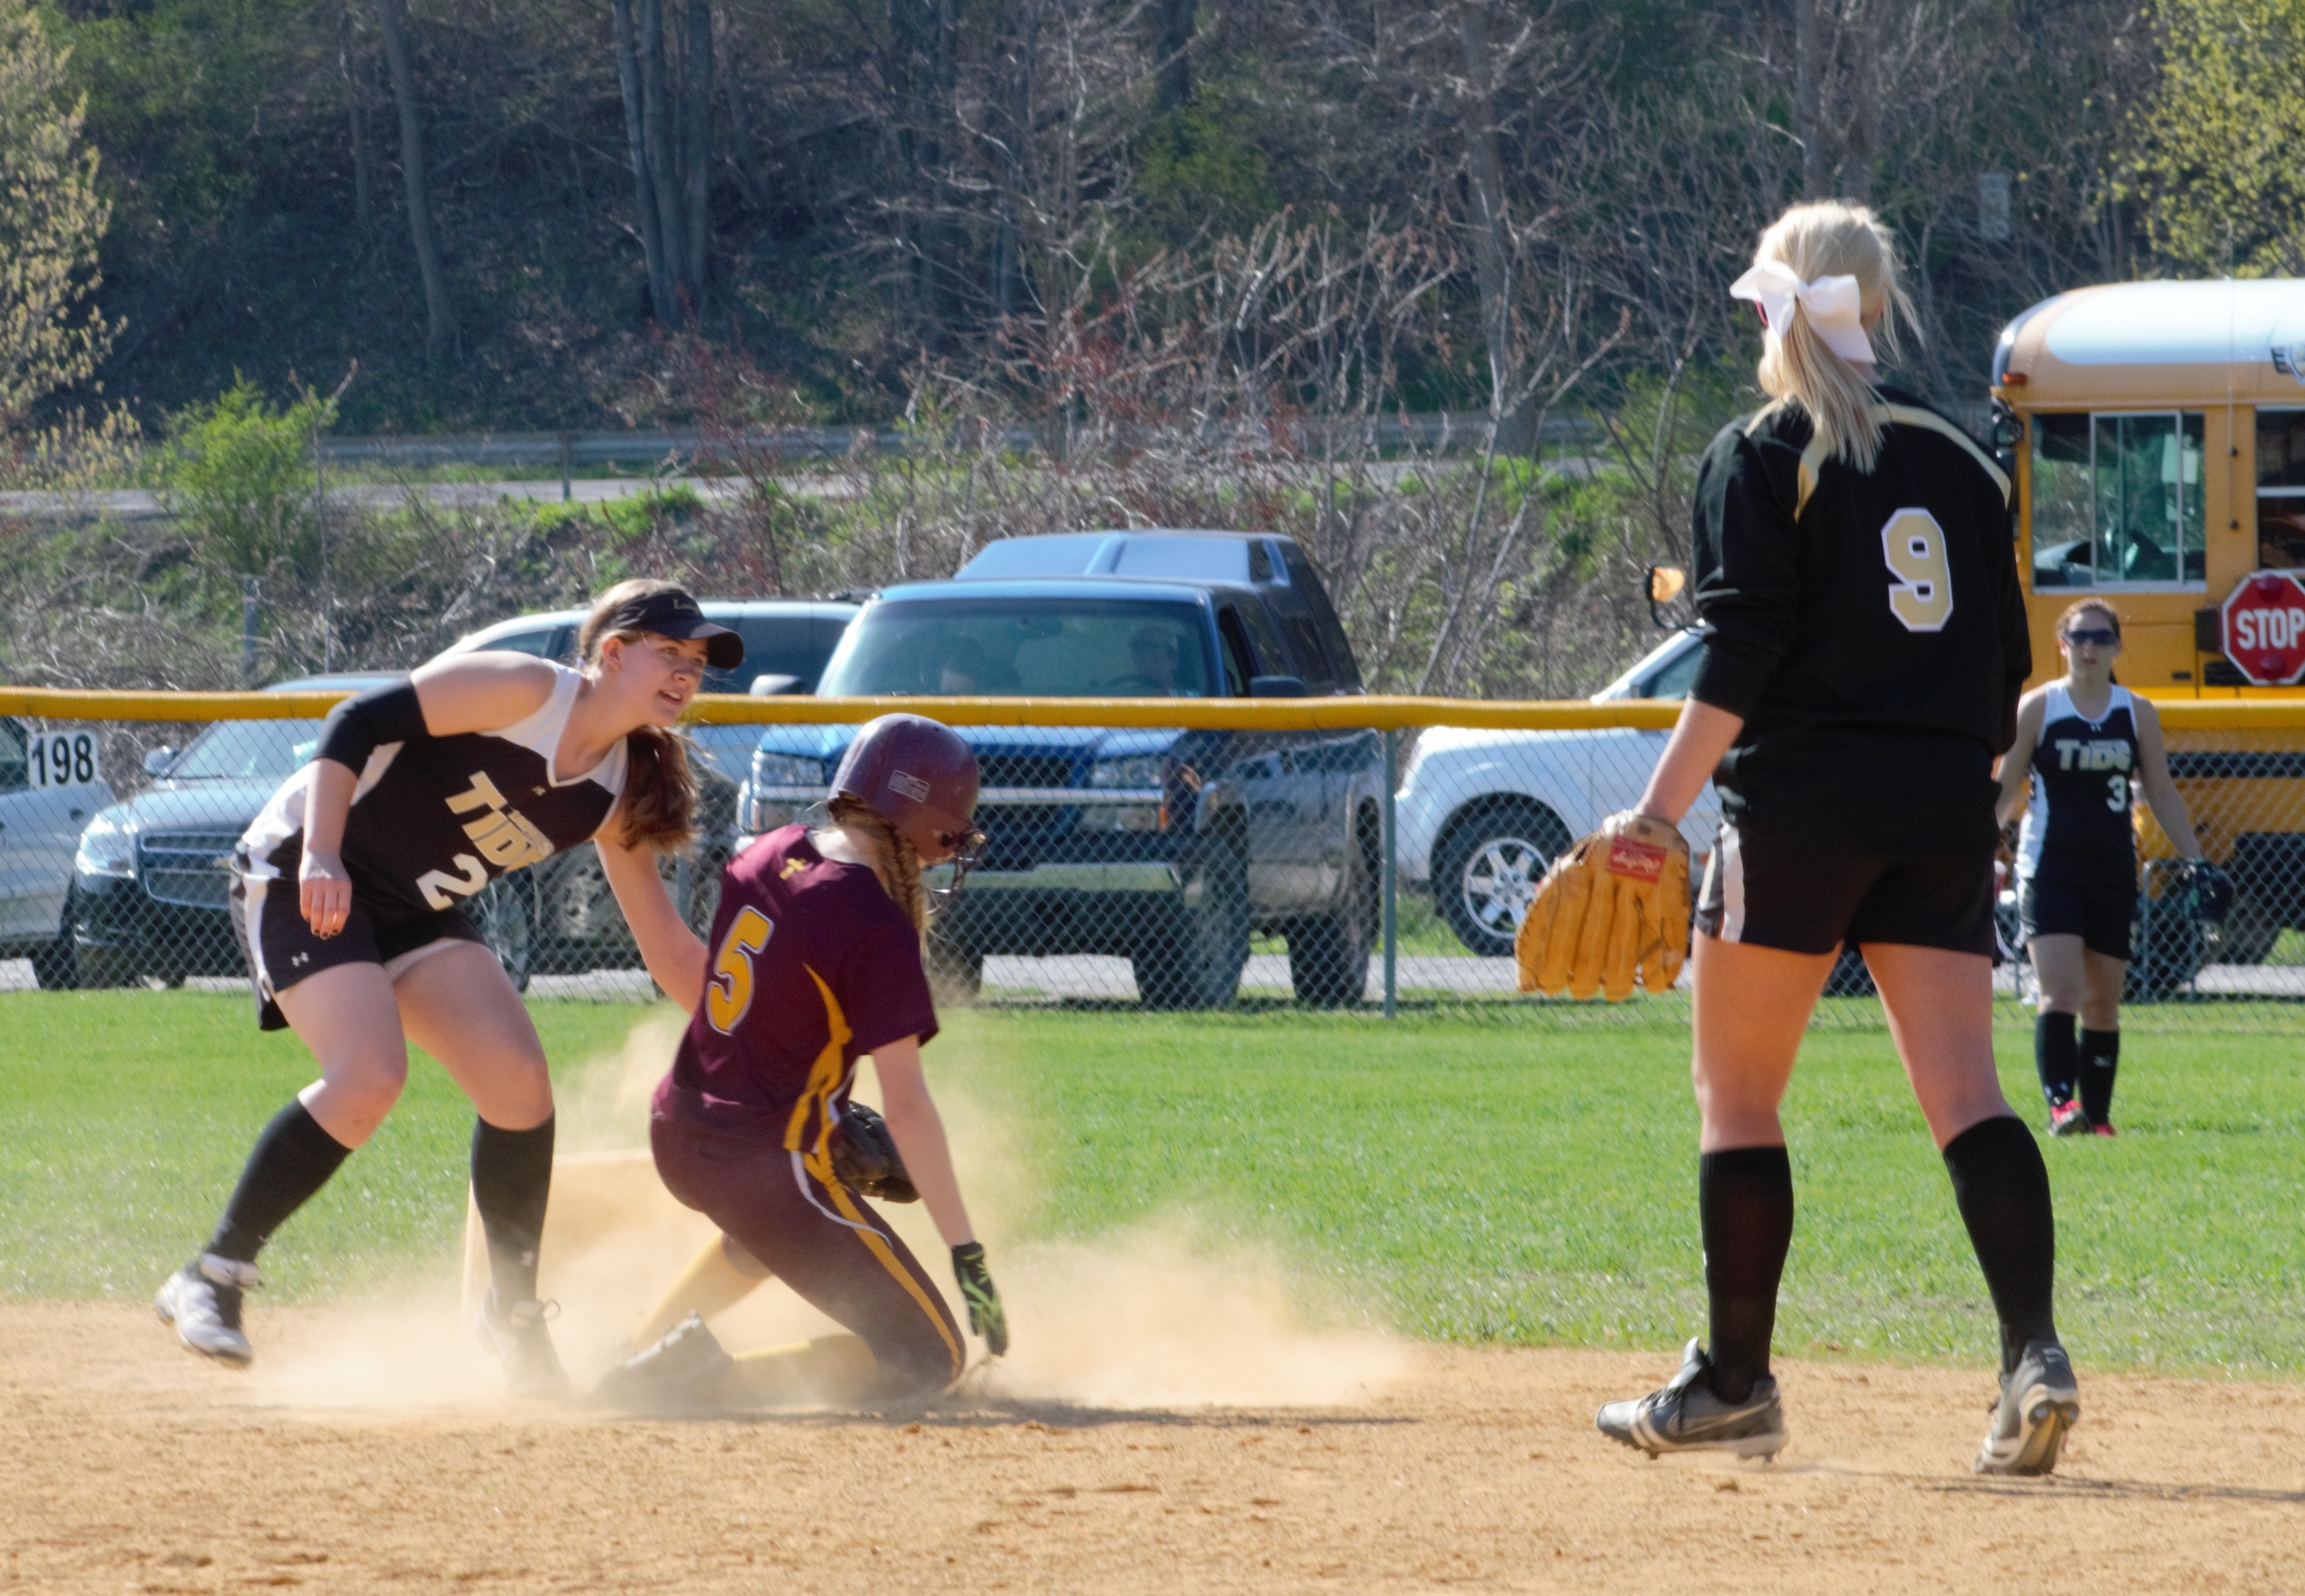 CLOSE AT SECOND - Curwensville shortstop Cheyenne Pentz holds the tage on Elk County Catholic's Maddy Schneider and looks for the call.  Schneider was called safe to help ECC to a 5-0 vidctory.  Second baseman Taylor Goodman (9) and leftfielder Abby Johnson look to back up the play. (photo by Rusty McCracken)